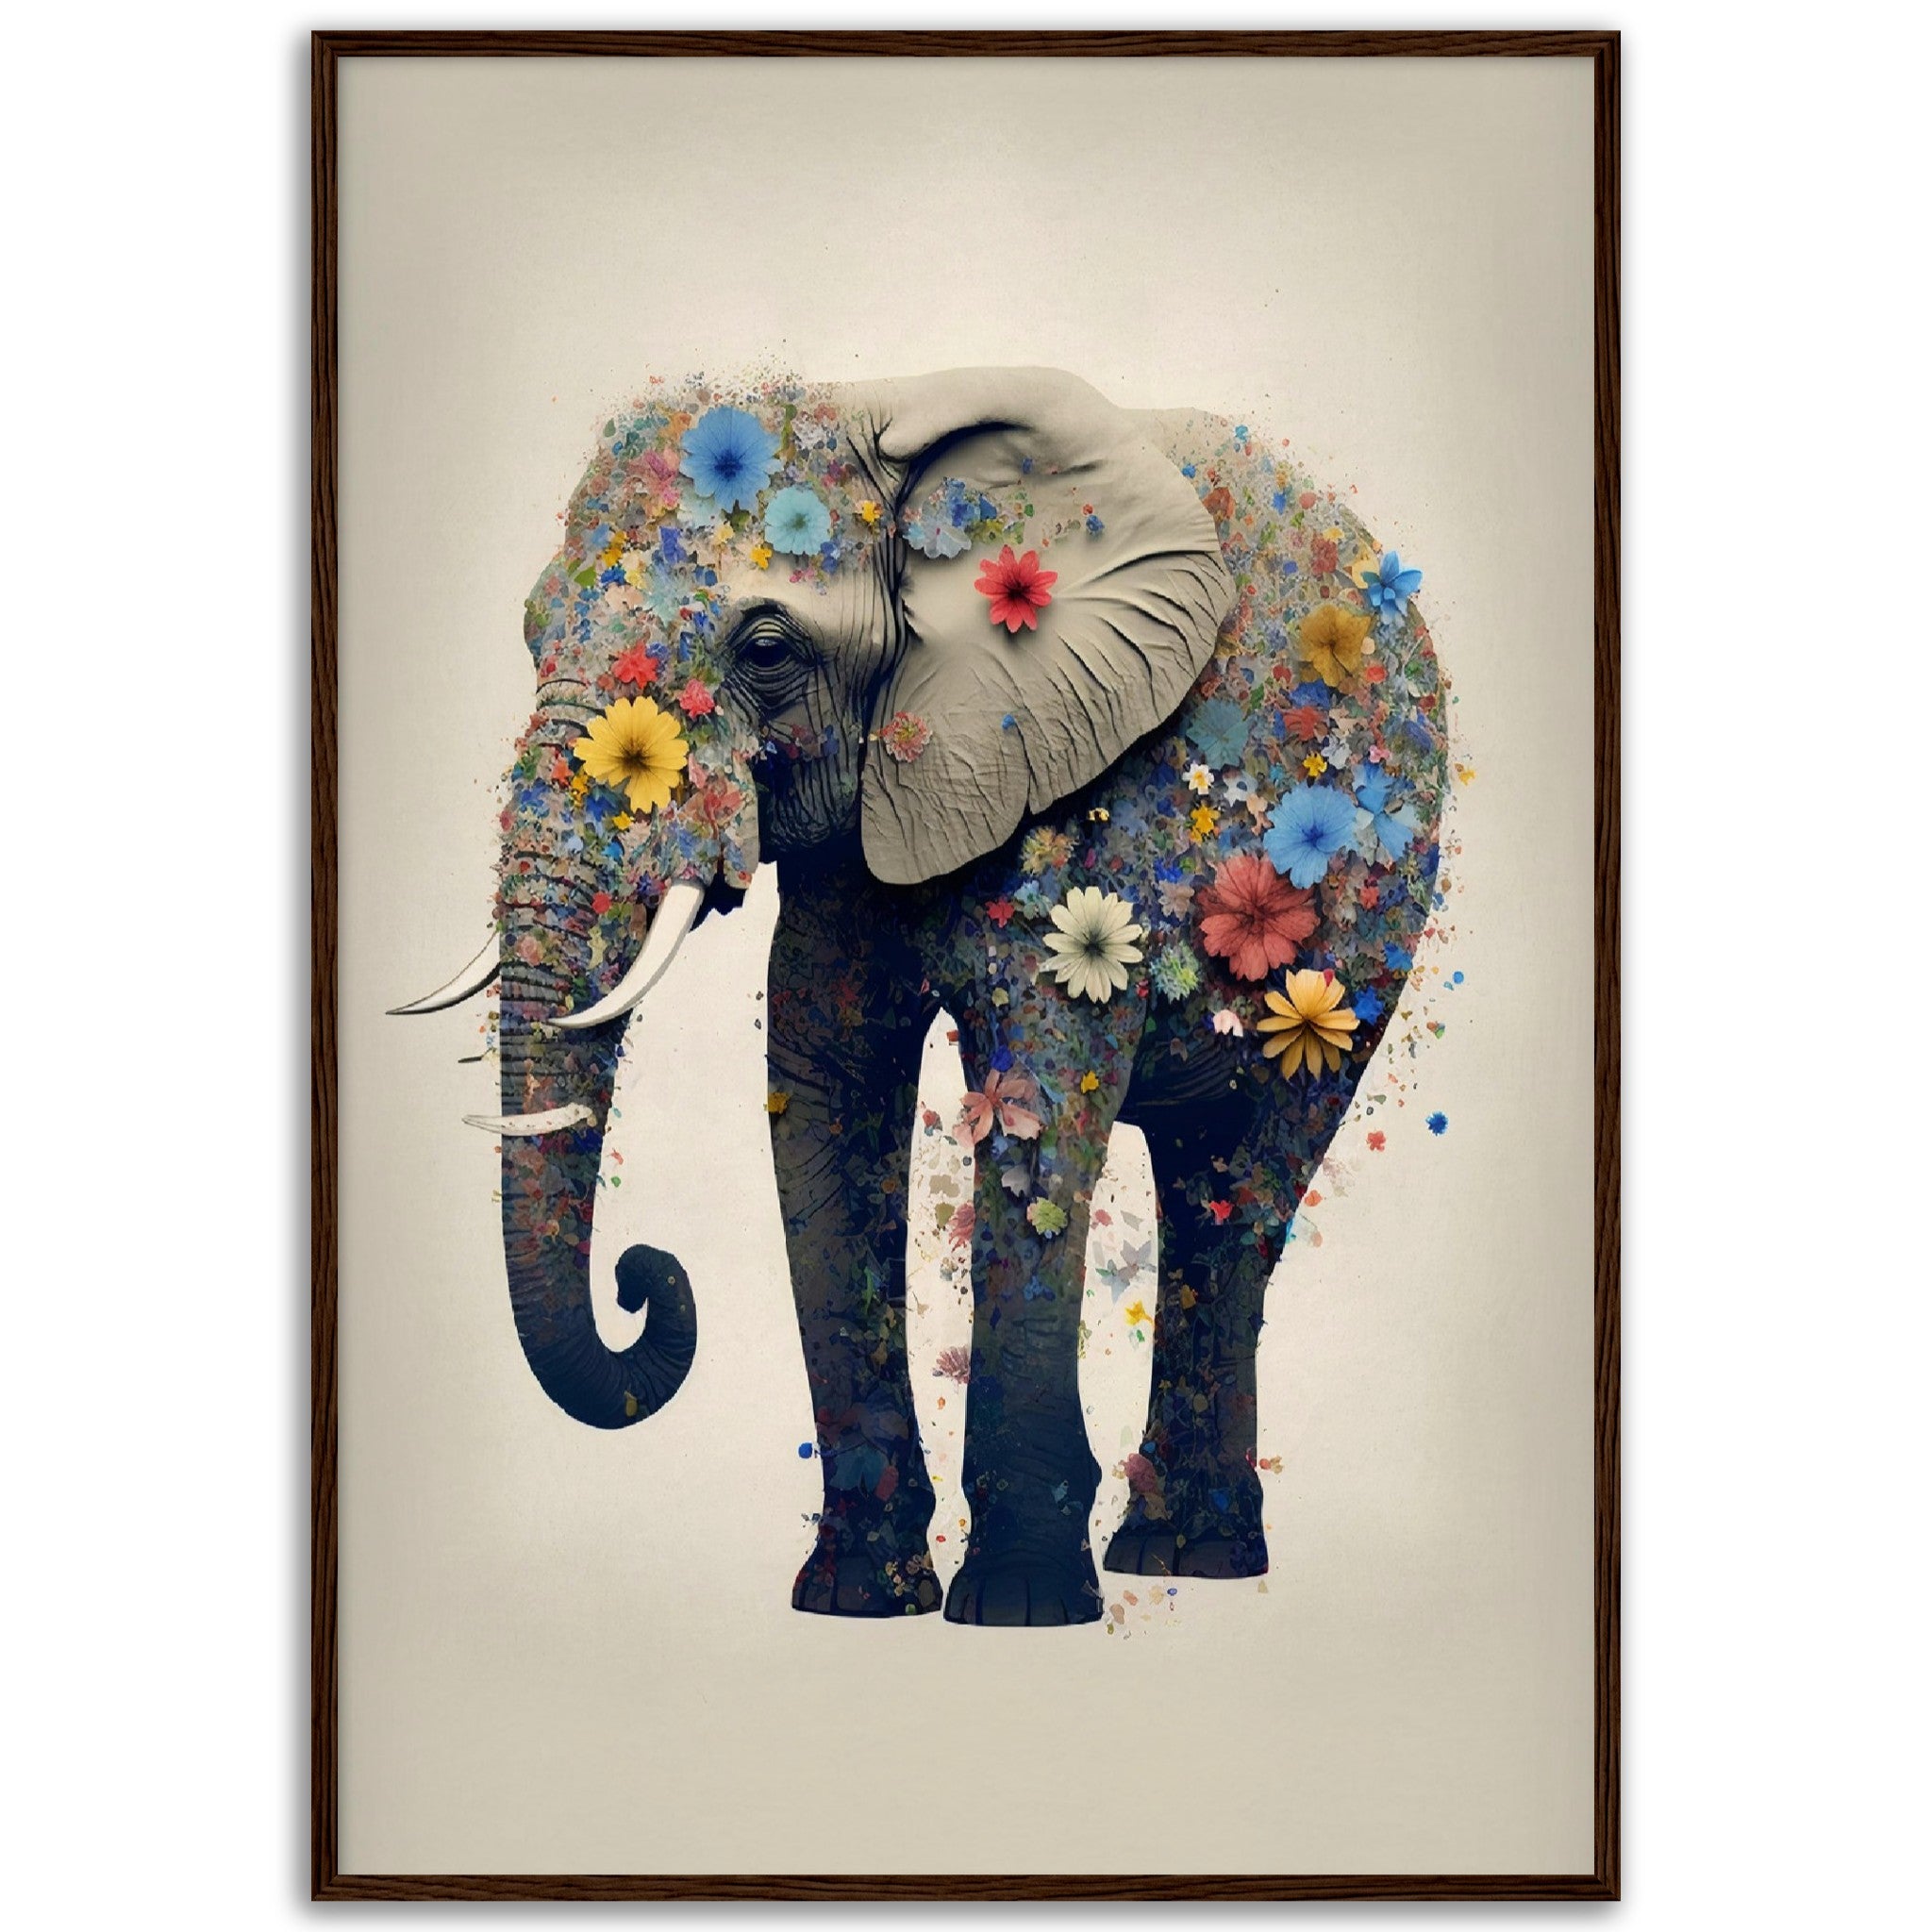 Abstract Floral Elephant - immersiarts